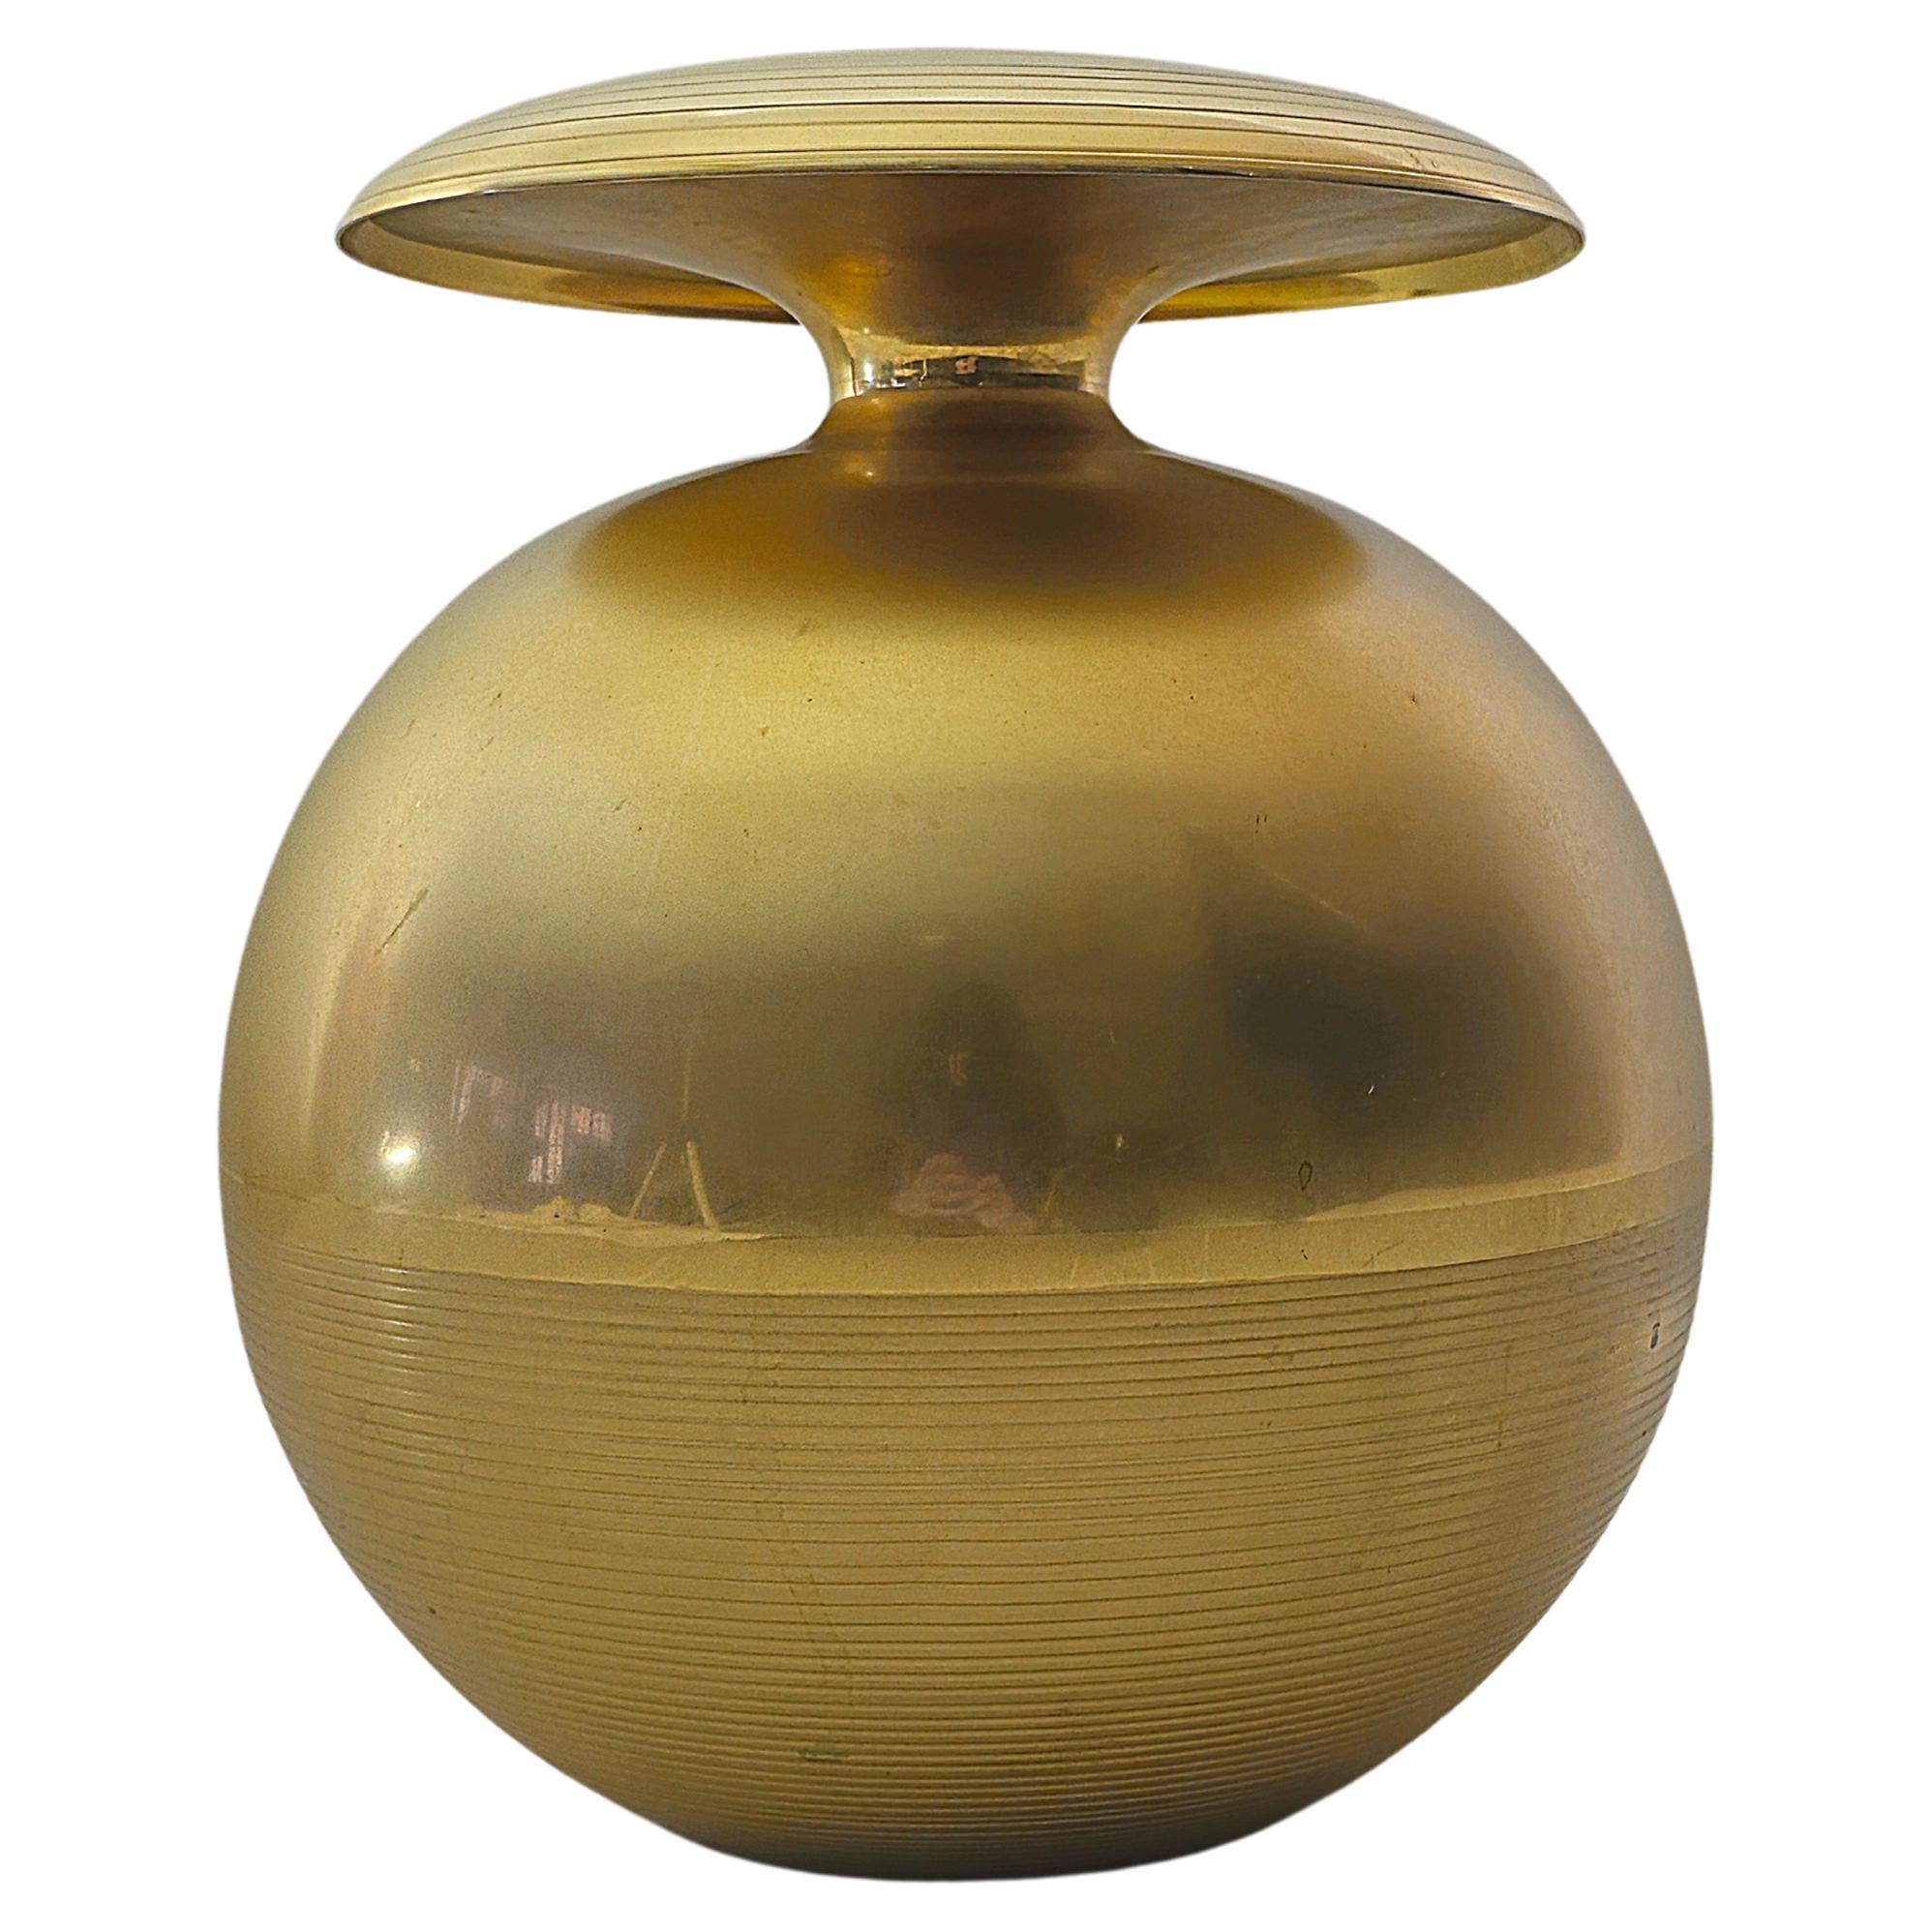 Sculptural spherical brass vase of considerable size, lower part with circle engravings. Particularity saucer accessory that rests on the upper part as demonstrated in the photos and videos. Italy, 1960s, unknown designer.



Note: We try to offer